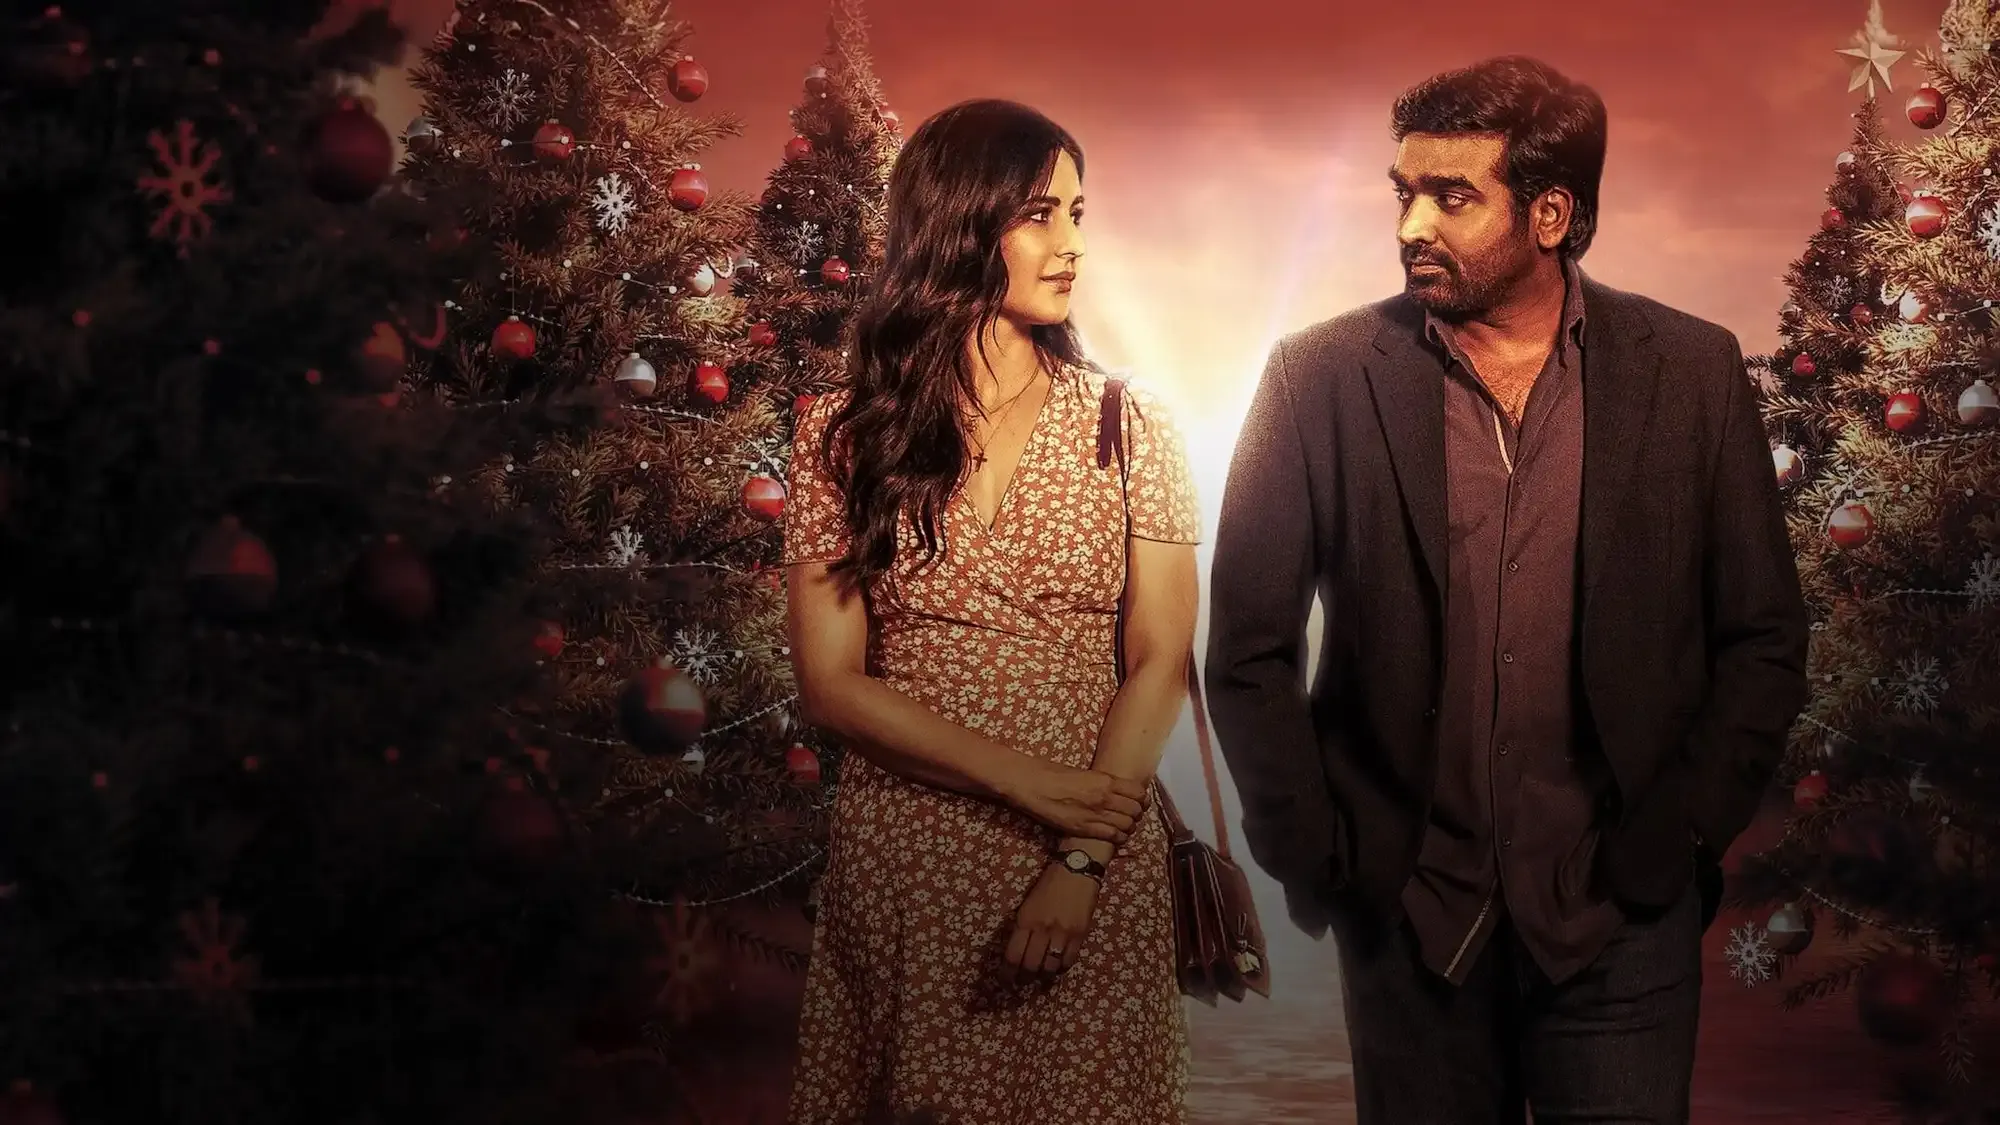 Merry Christmas movie review